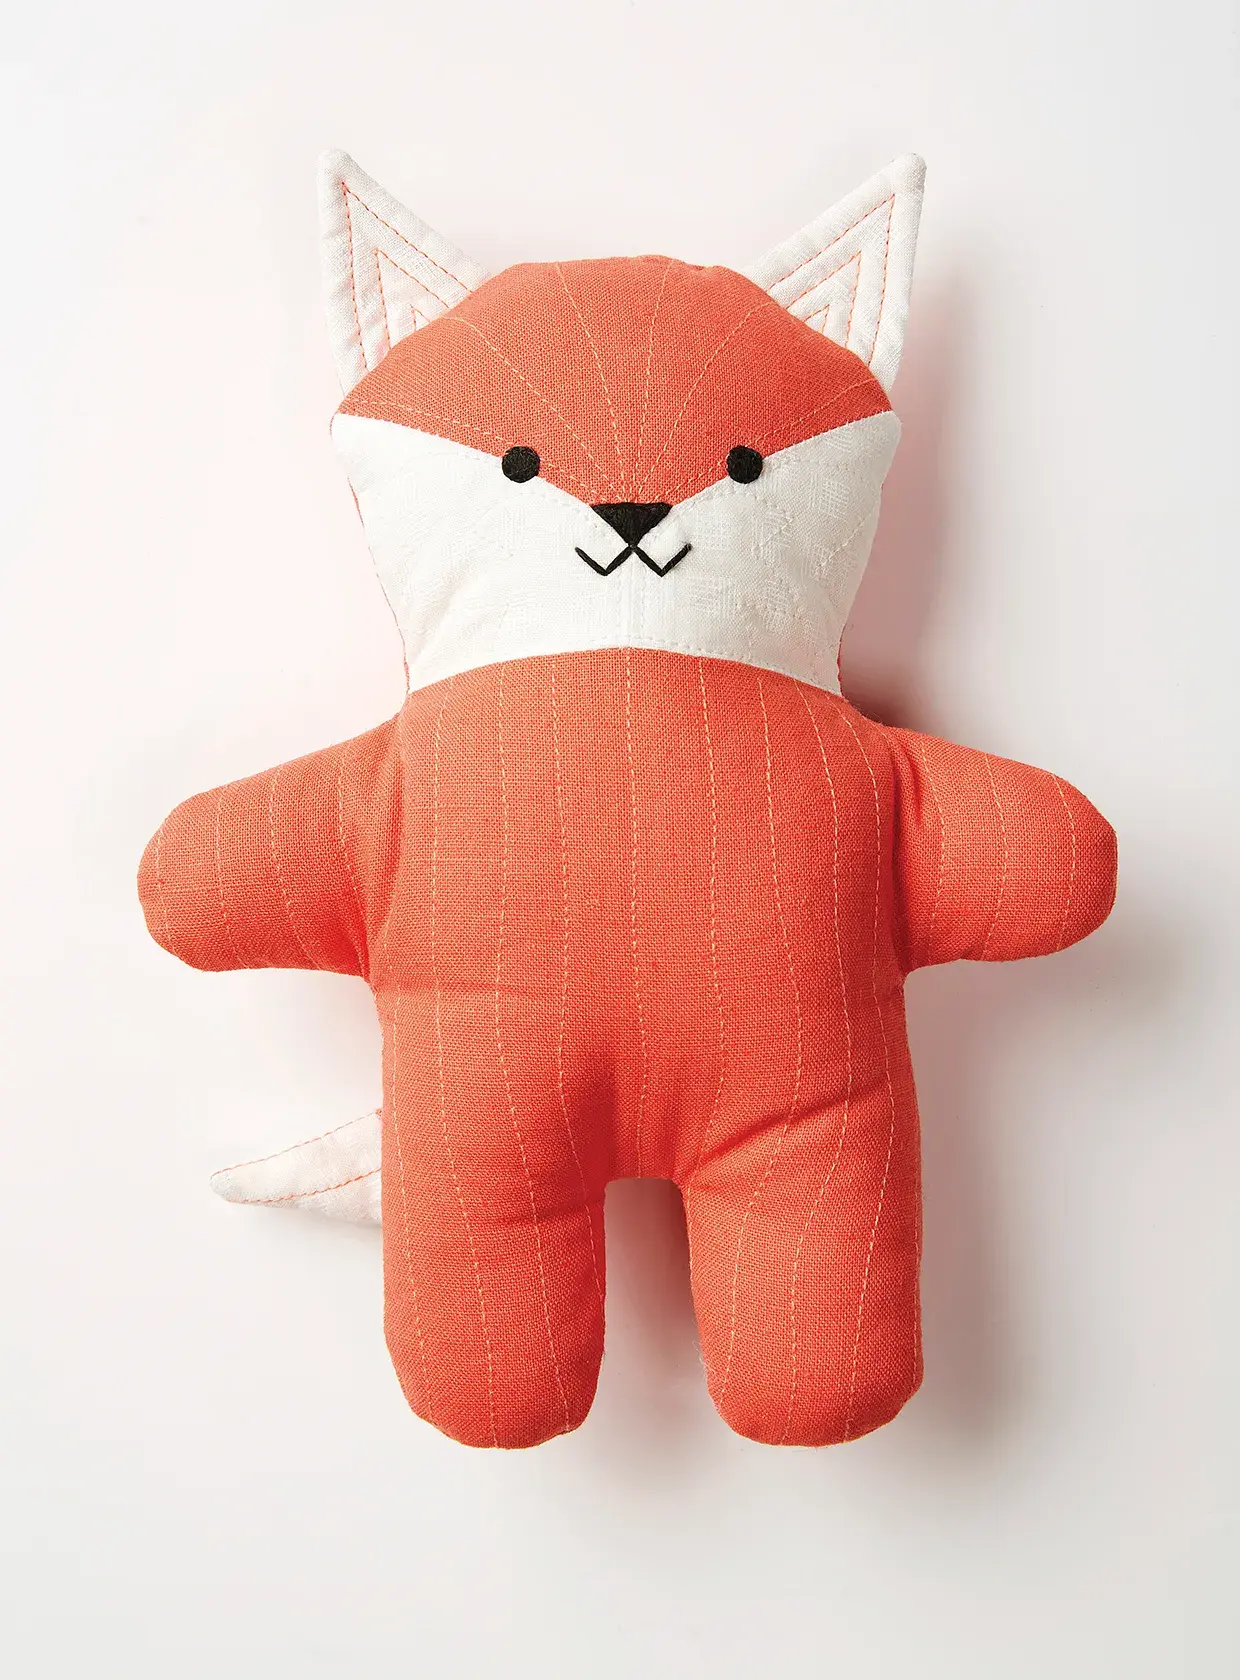 Free fox sewing pattern – How to sew a fox plush toy